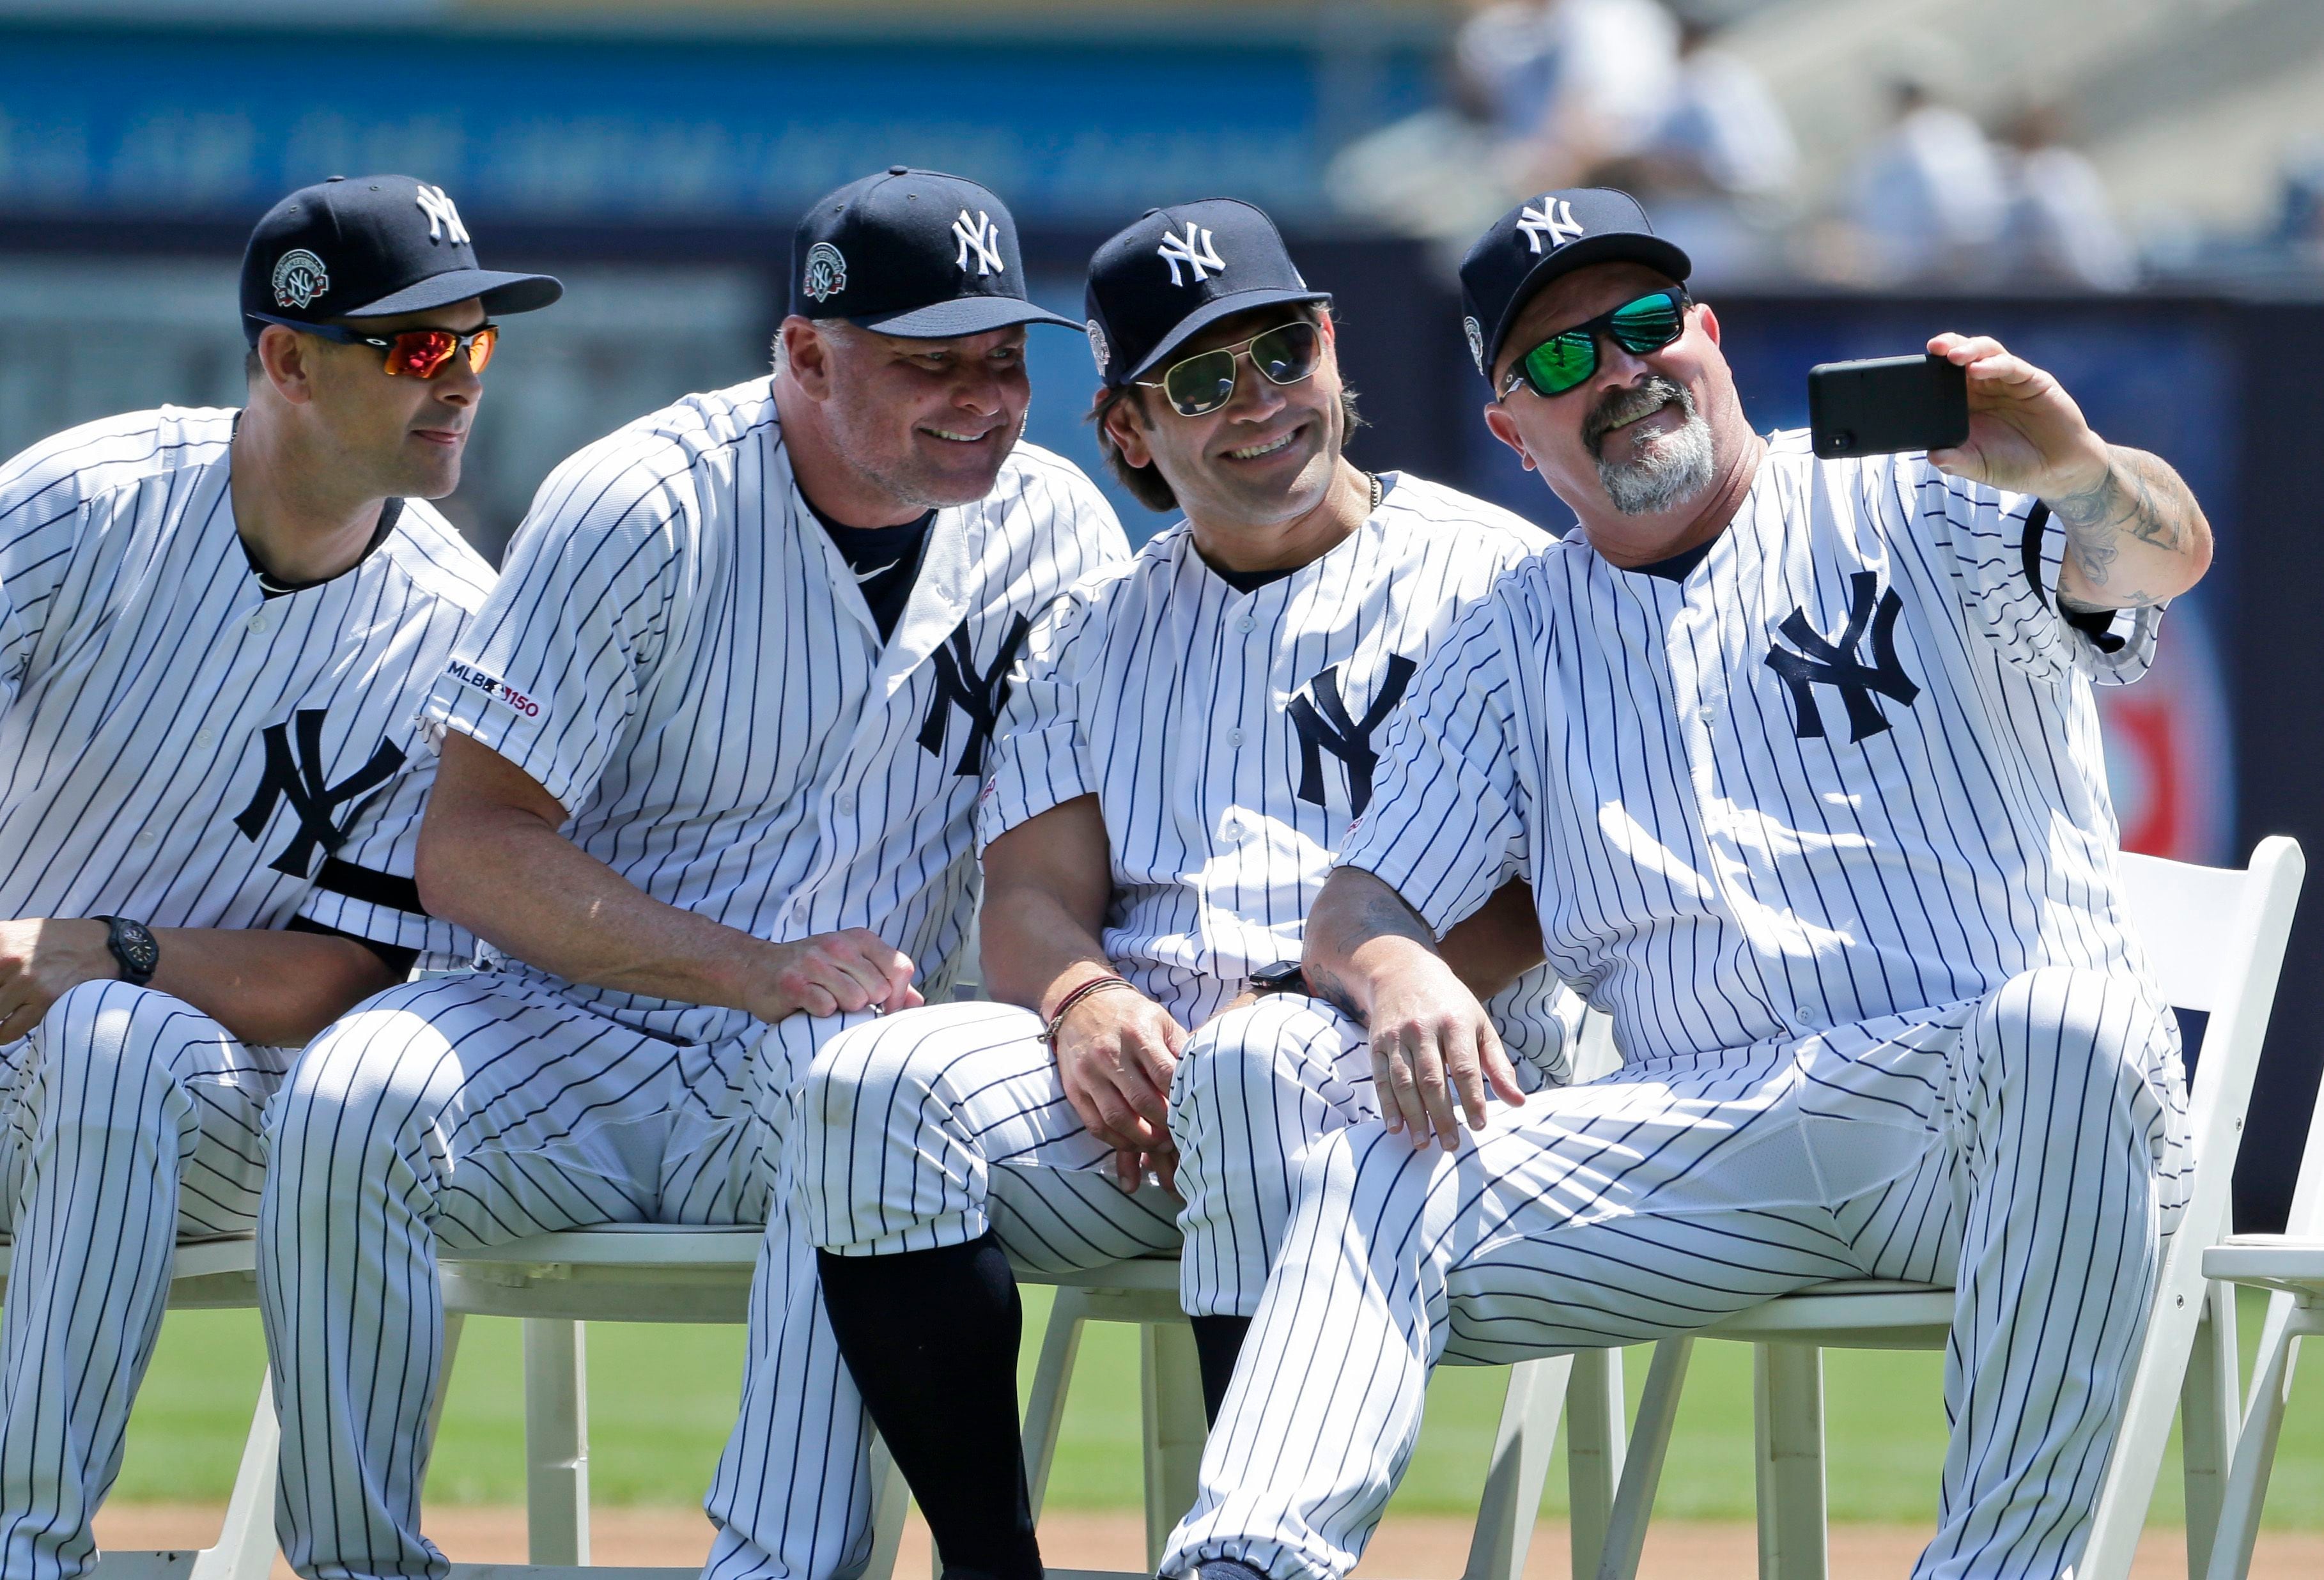 MLB All-Star Game extra special for trio of Yankee first-timers